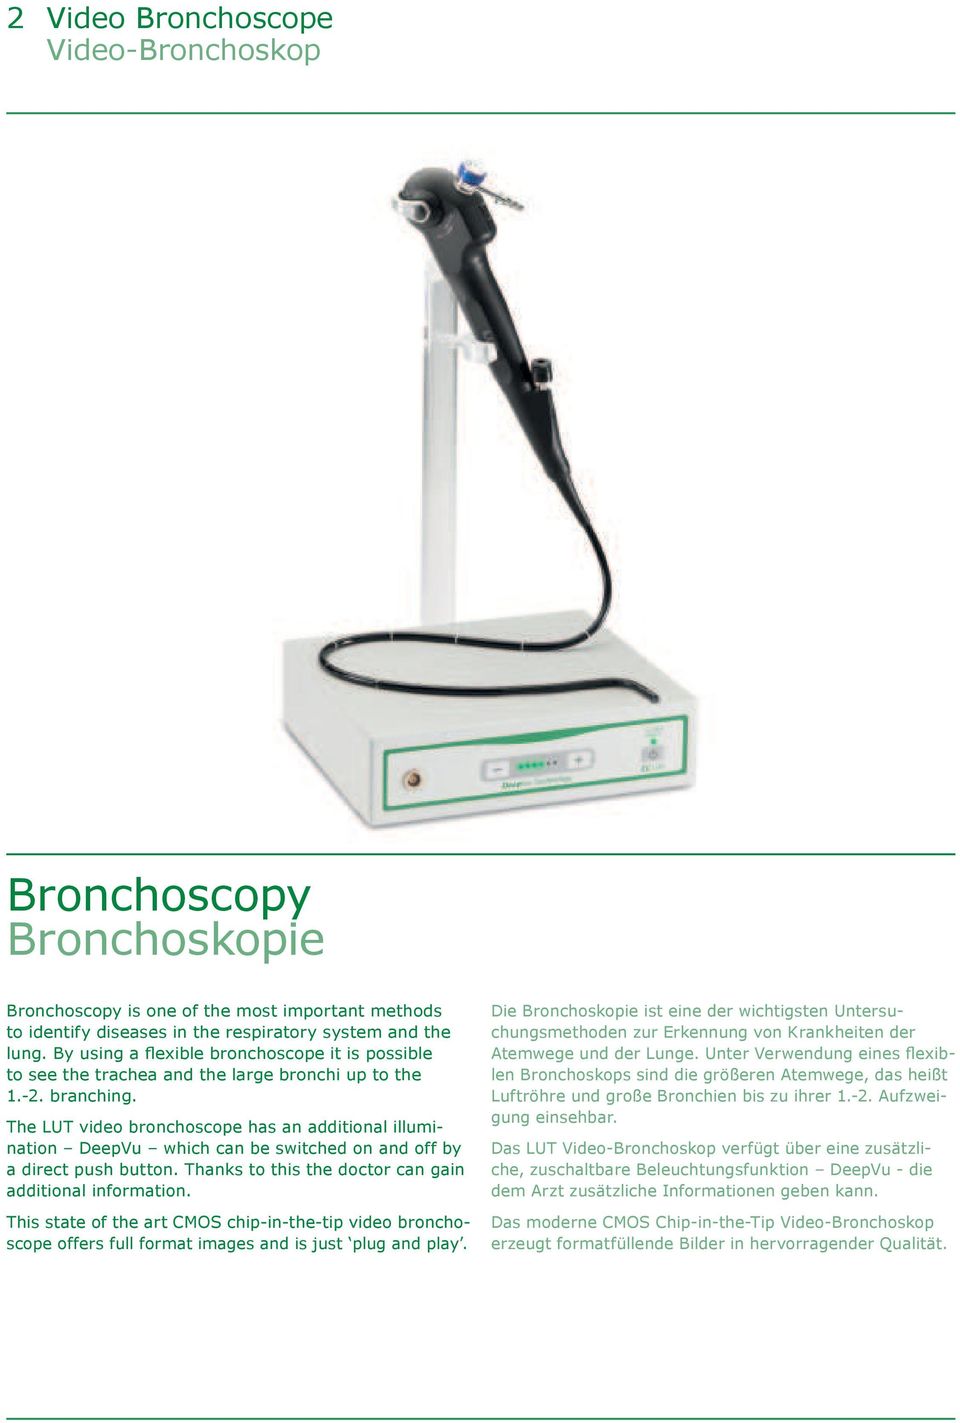 The LUT video bronchoscope has an additional illumination DeepVu which can be switched on and off by a direct push button. Thanks to this the doctor can gain additional information.